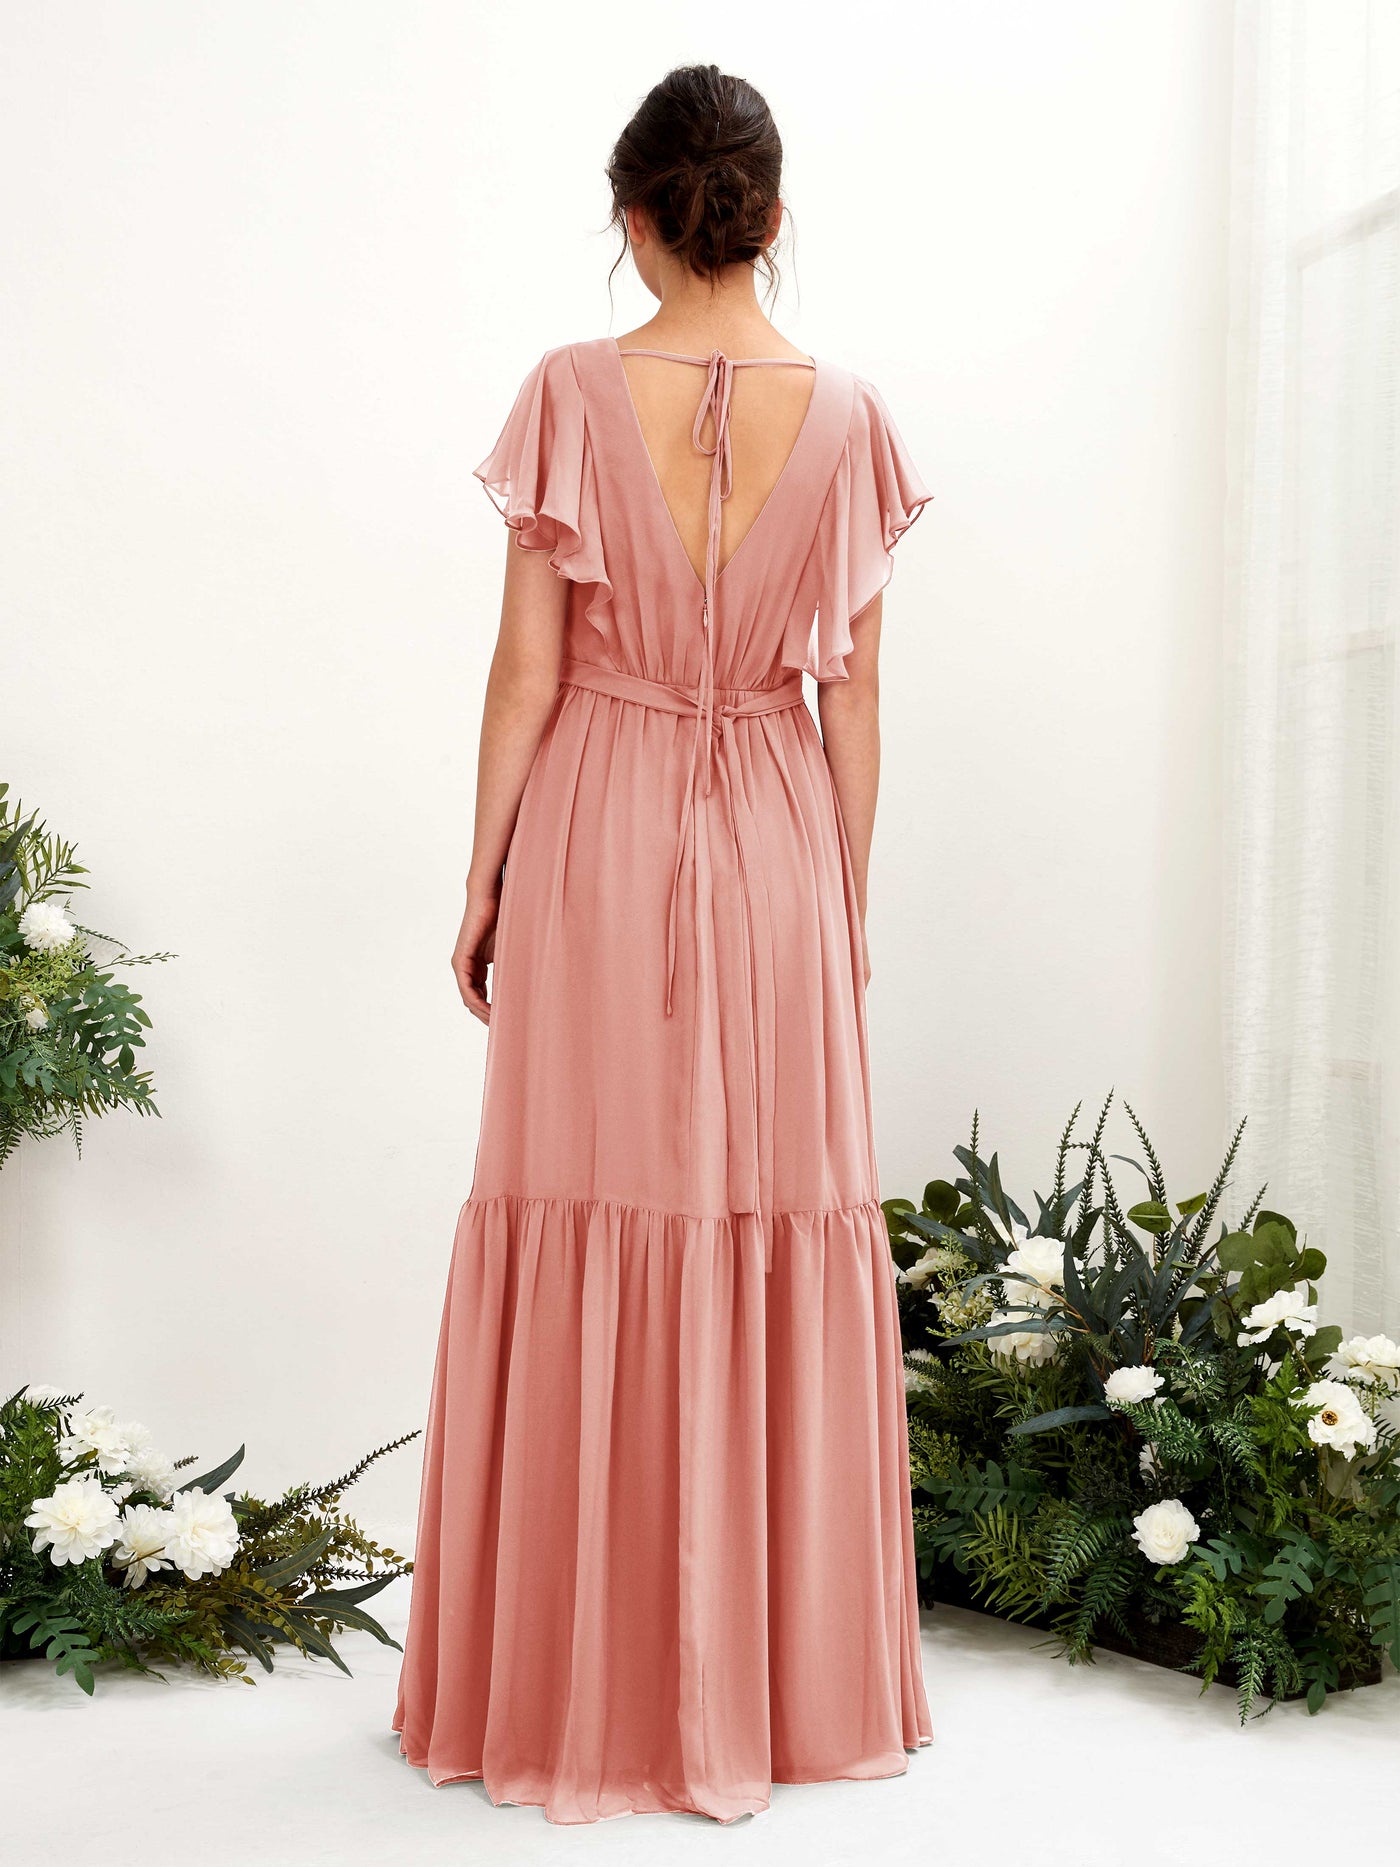 Champagne Rose Bridesmaid Dresses Bridesmaid Dress A-line Chiffon V-neck Full Length Short Sleeves Wedding Party Dress (81225906)#color_champagne-rose